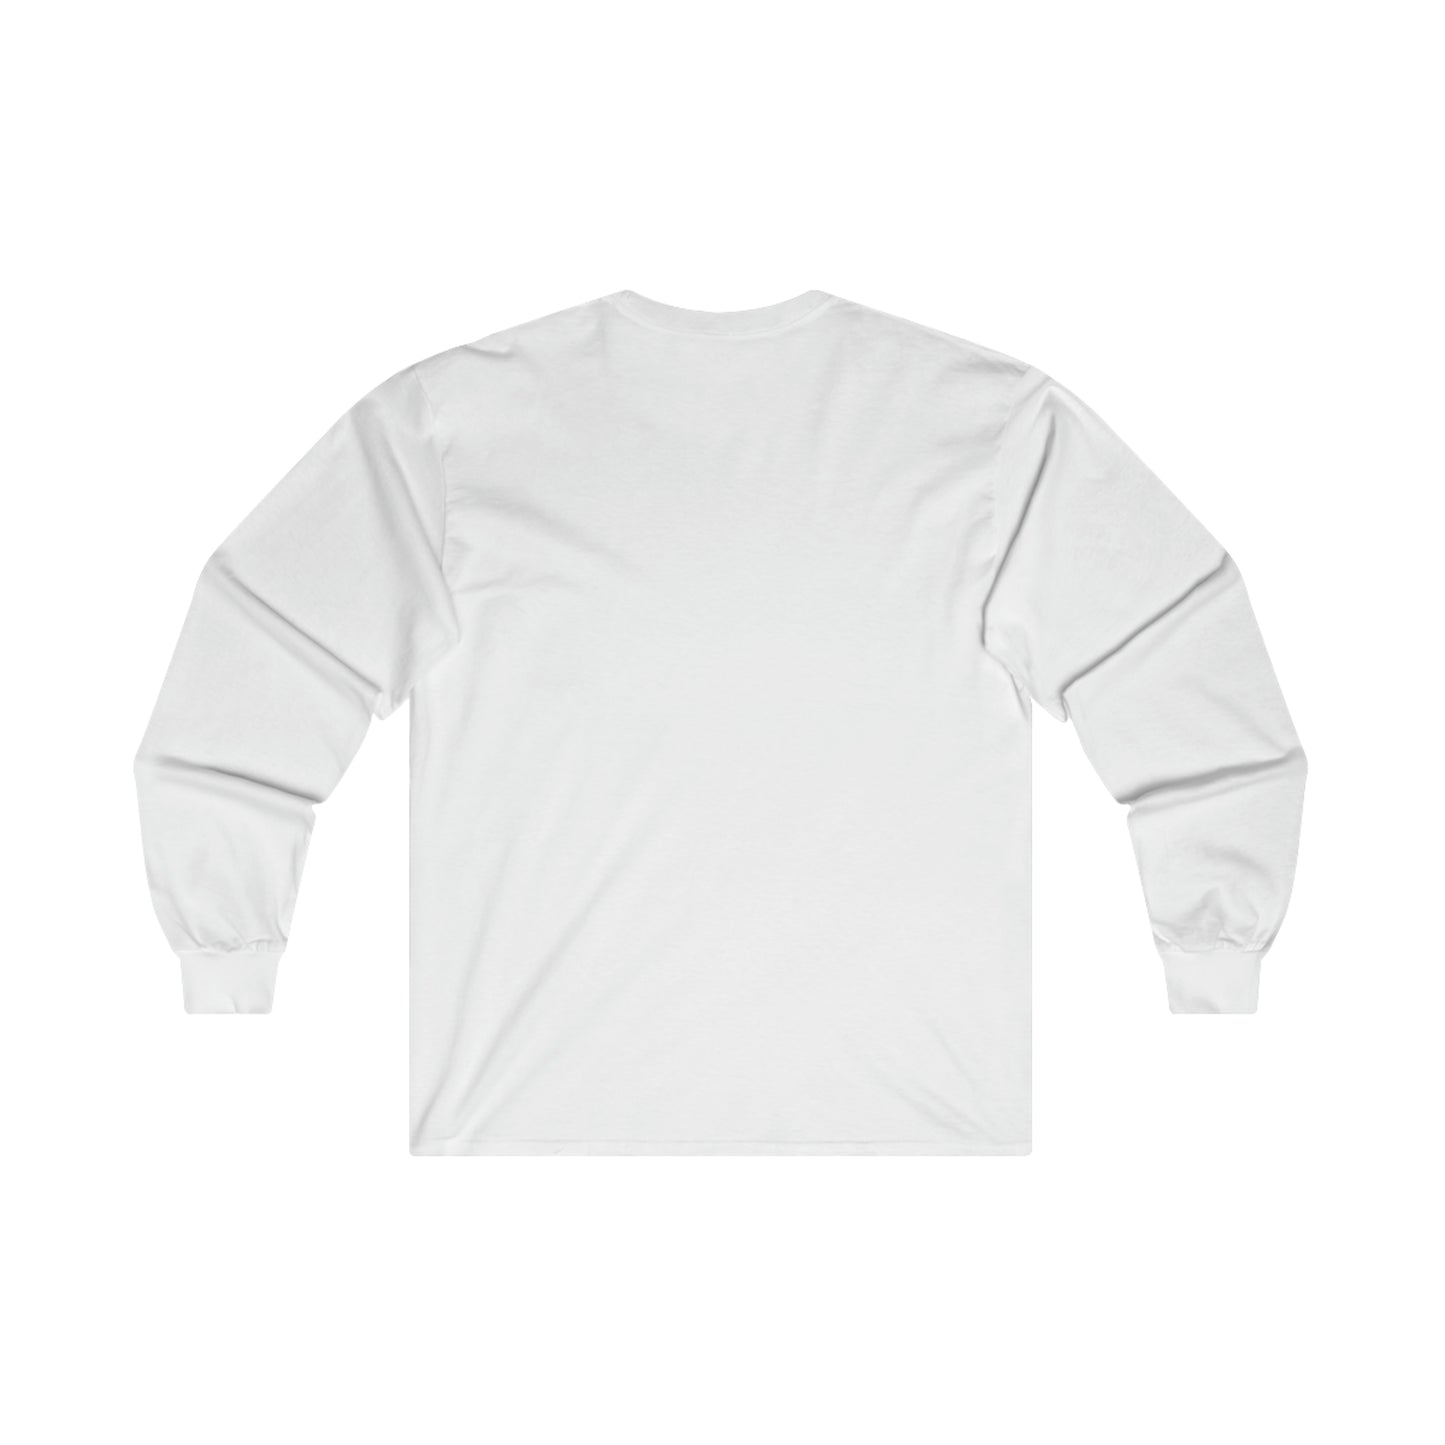 The 31 piece camping set - Ultra Cotton Long Sleeve Tee